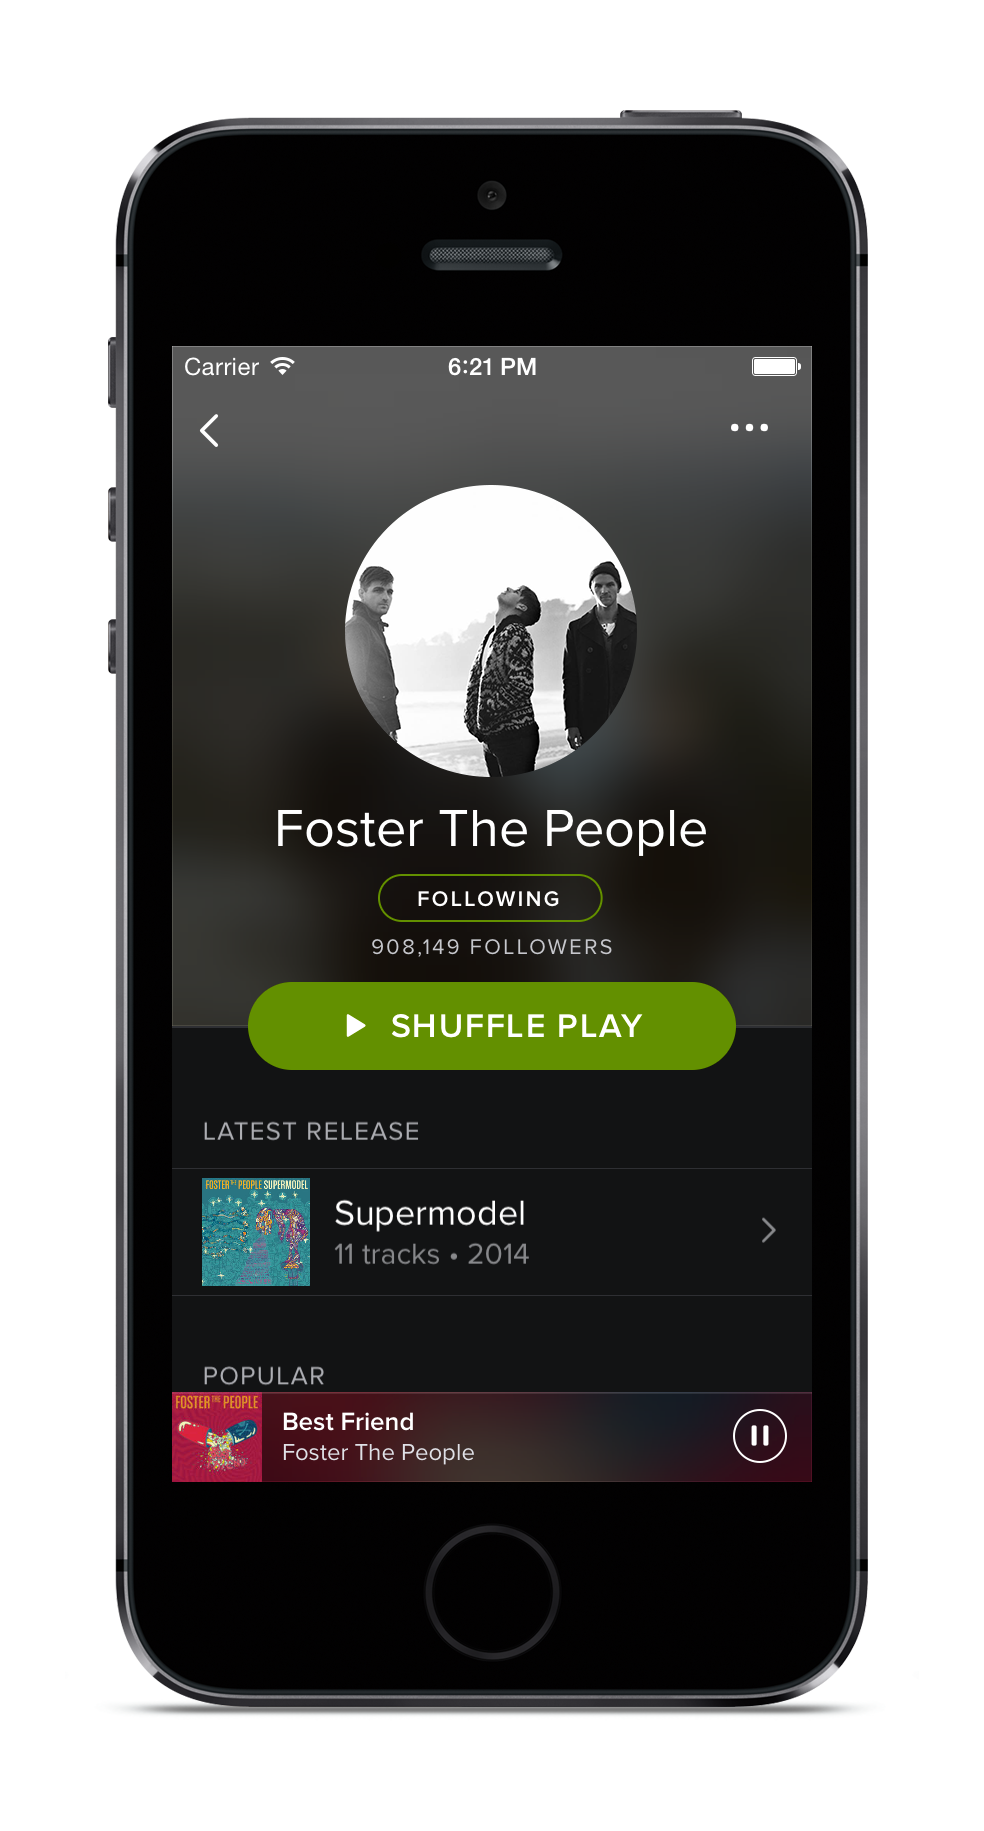 Spotify's new design on the iPhone